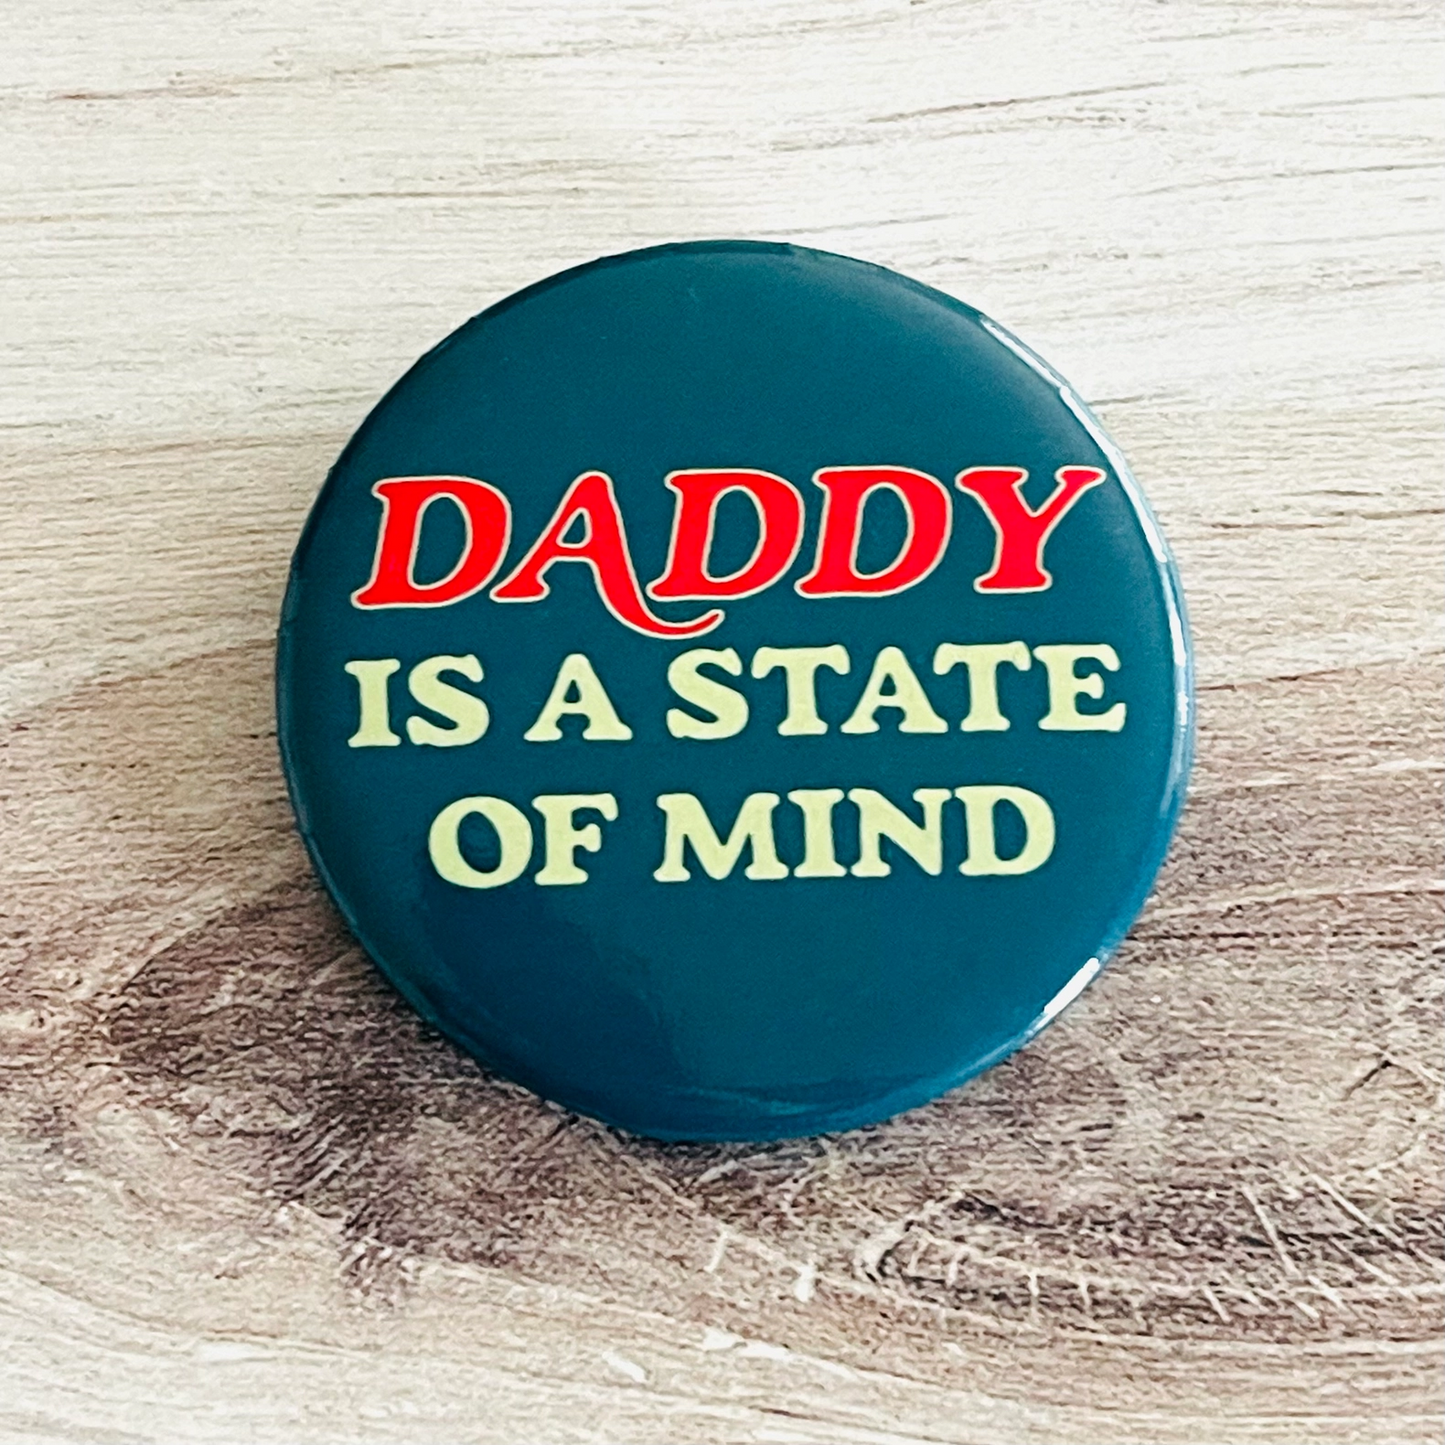 Daddy Is A State of Mind Button